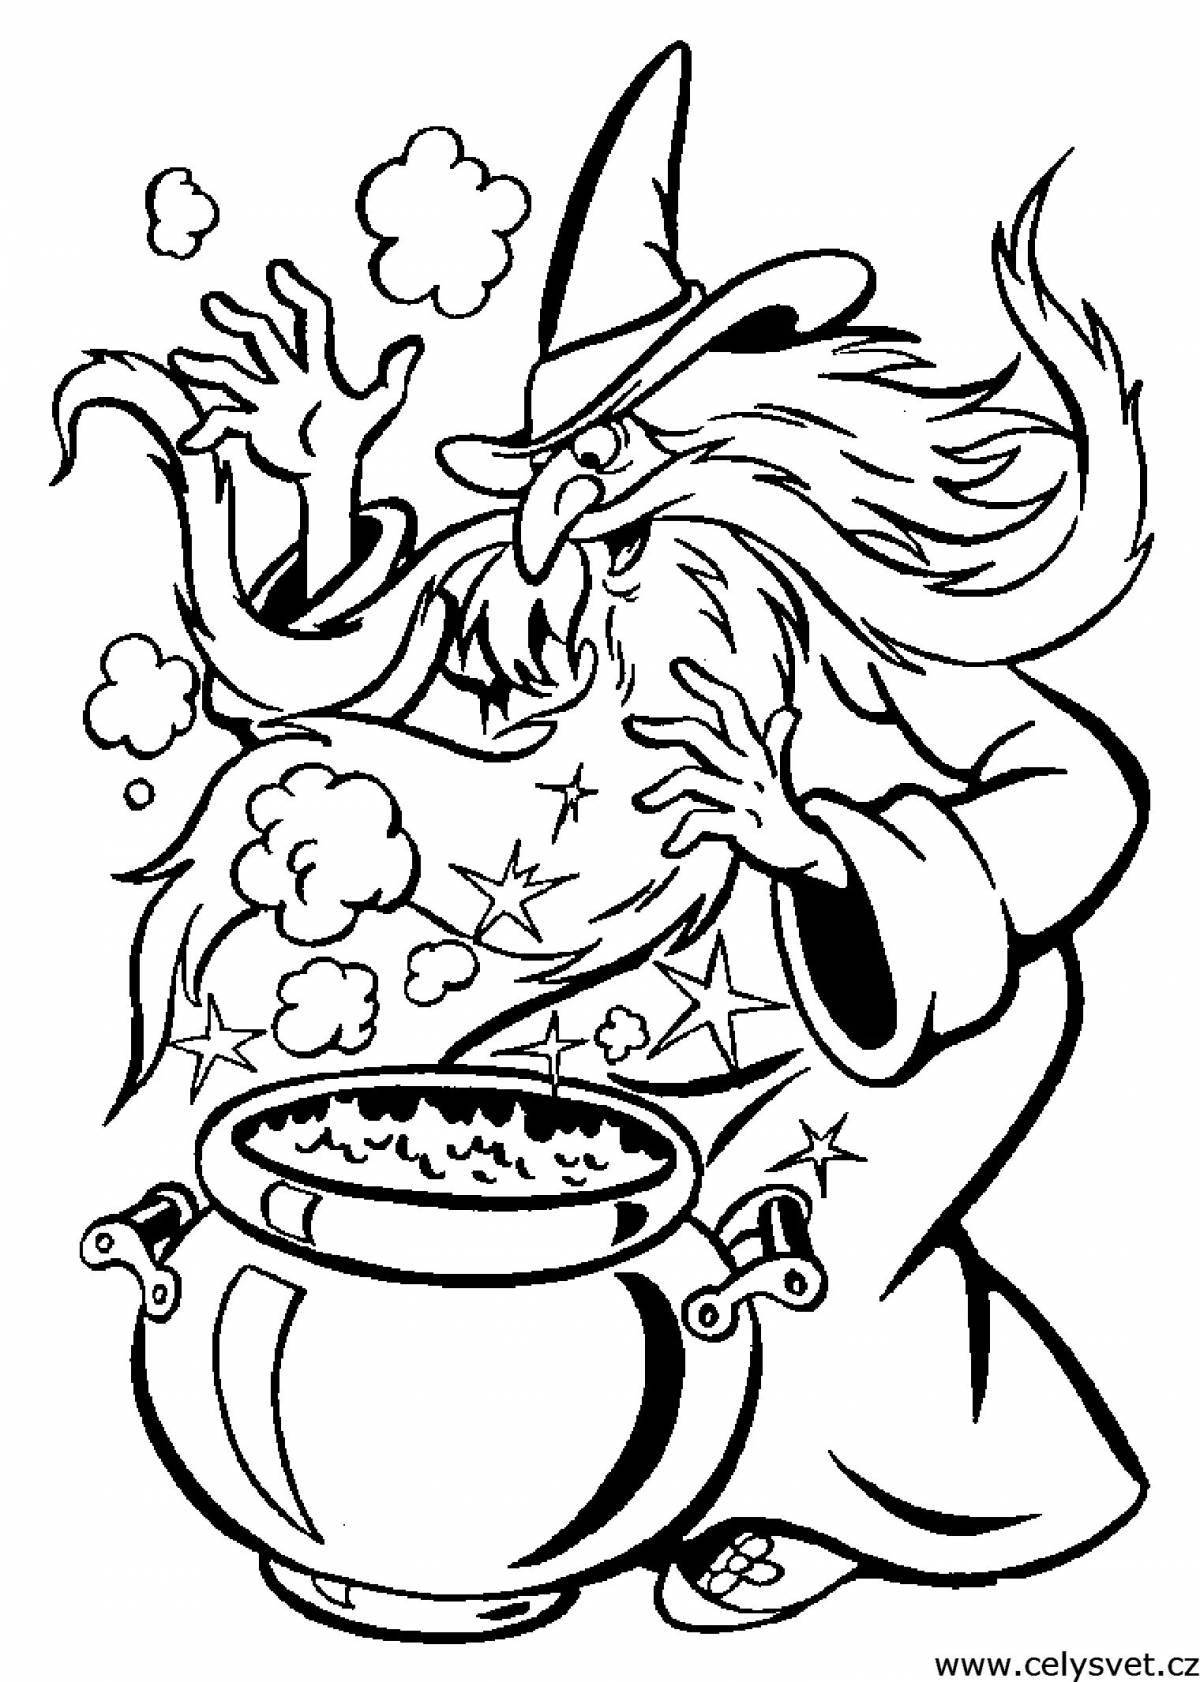 Fascinating fairy tale coloring pages